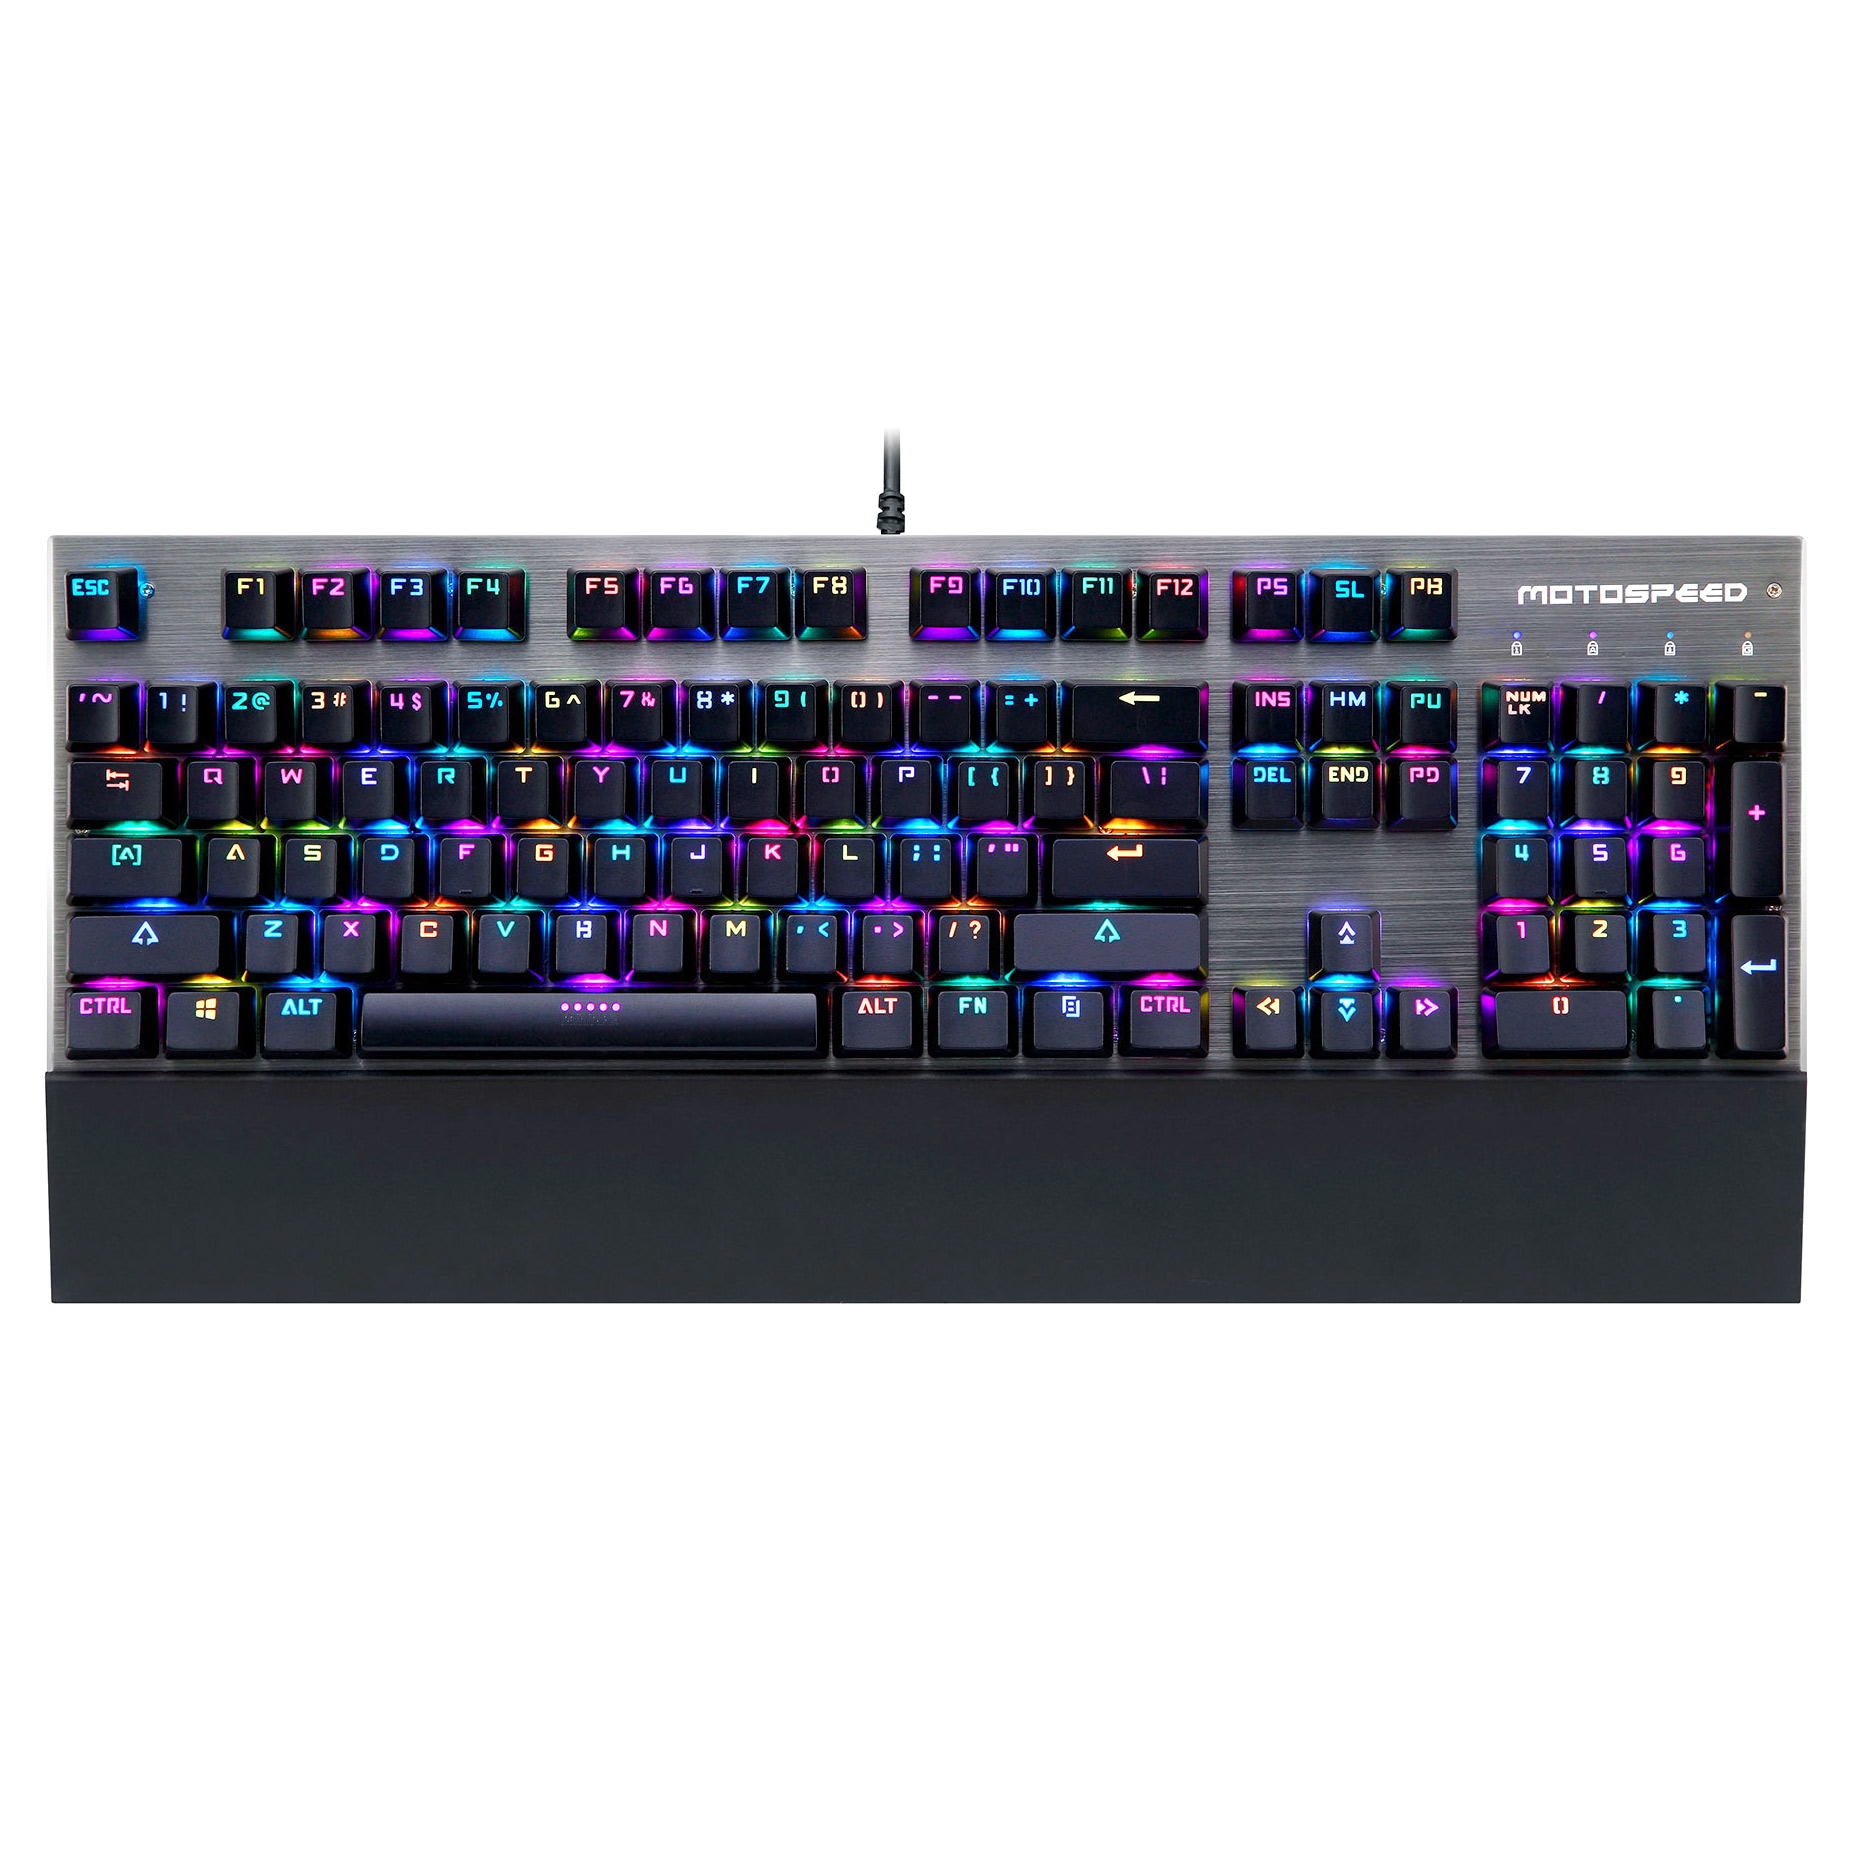 Official Motospeed CK108 RGB Wired Gaming Mechanical Keyboard - Outemu Switch